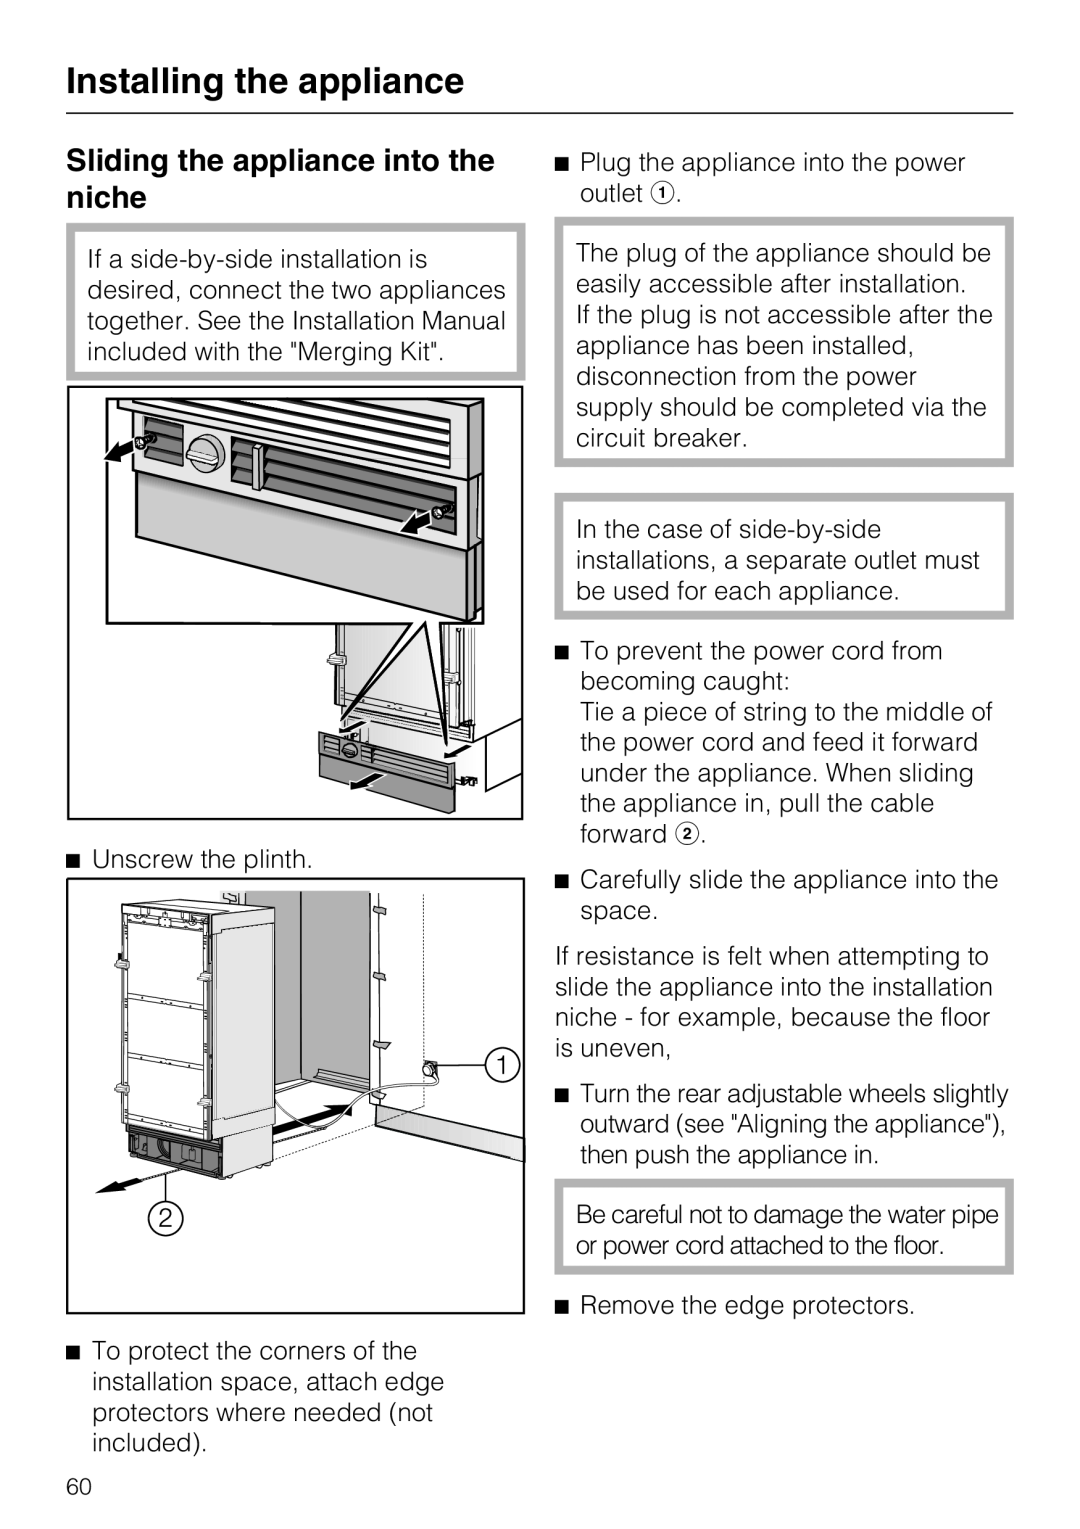 Miele F 1411 Vi installation instructions Sliding the appliance into the niche, Installing the appliance 